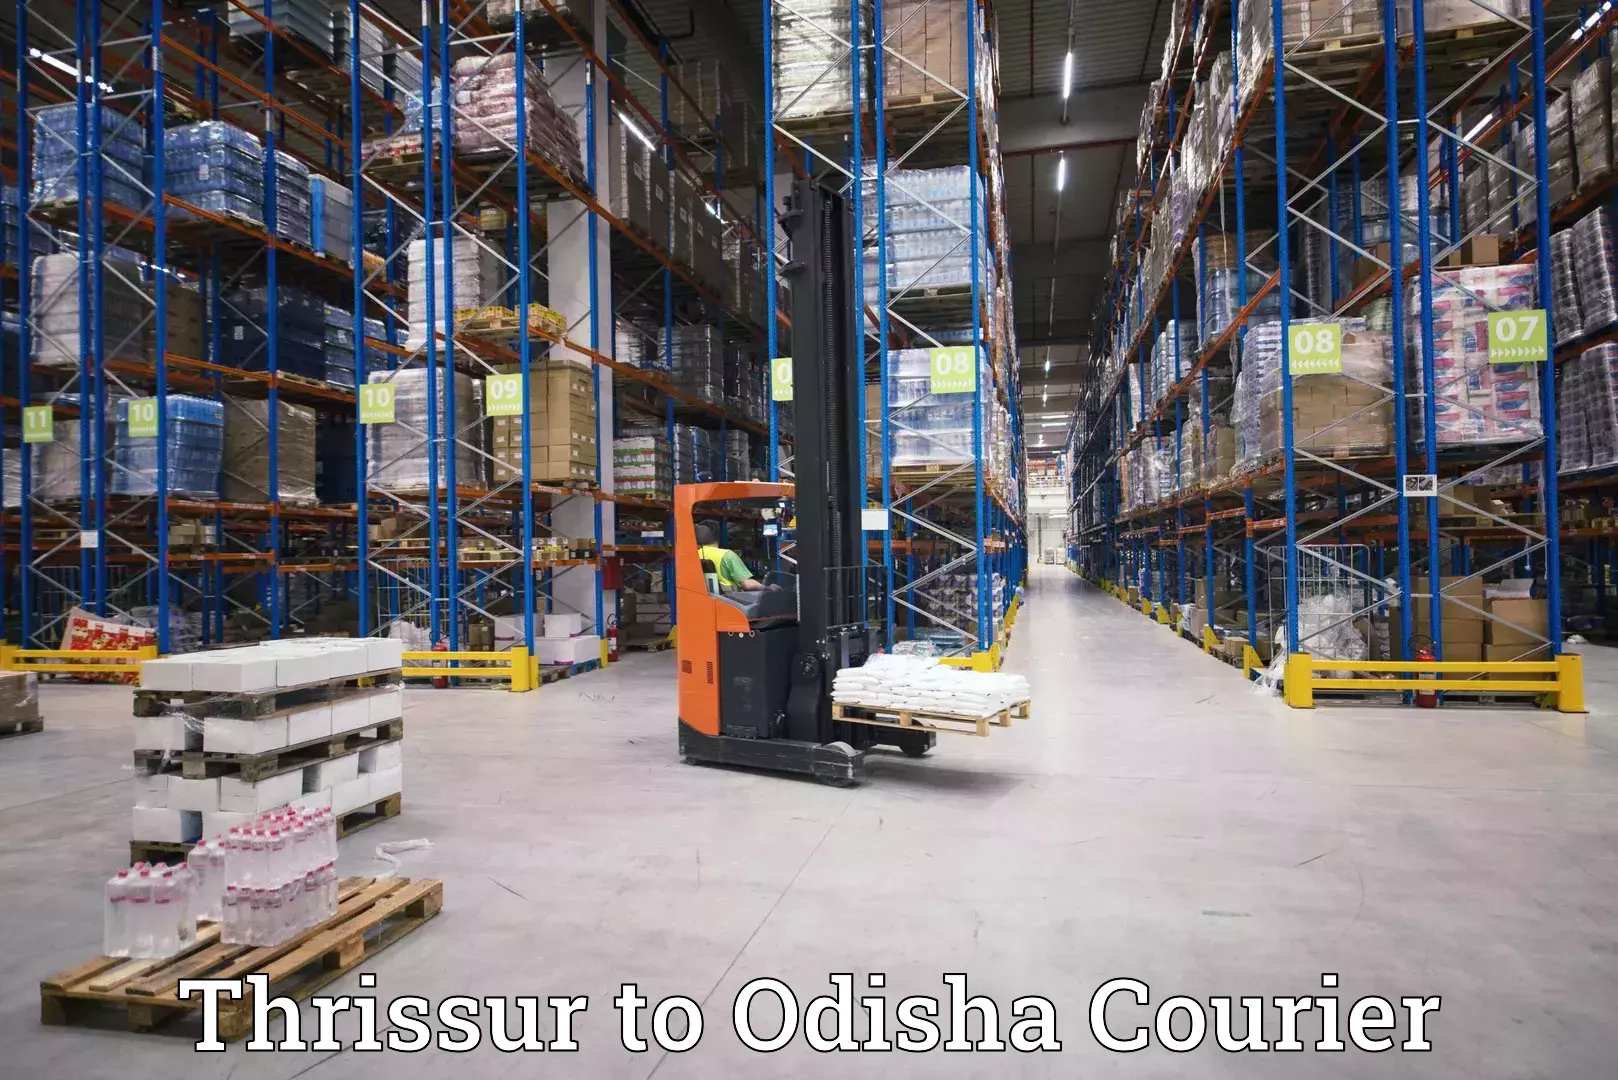 Global shipping networks Thrissur to Odisha